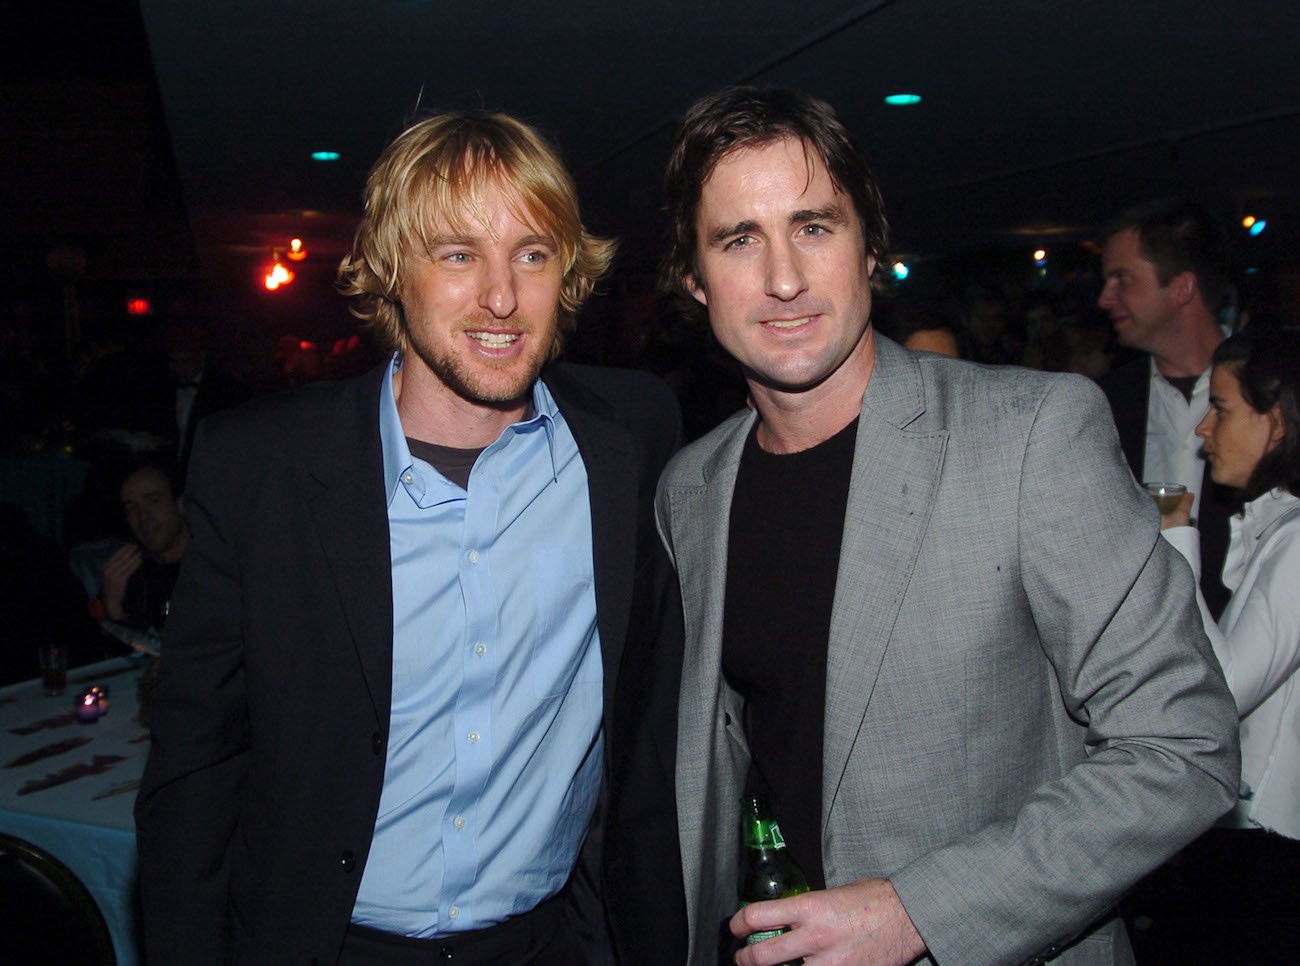 Owen Wilson and Luke Wilson at the premiere of 'The Life Aquatic with Steve Zissou'